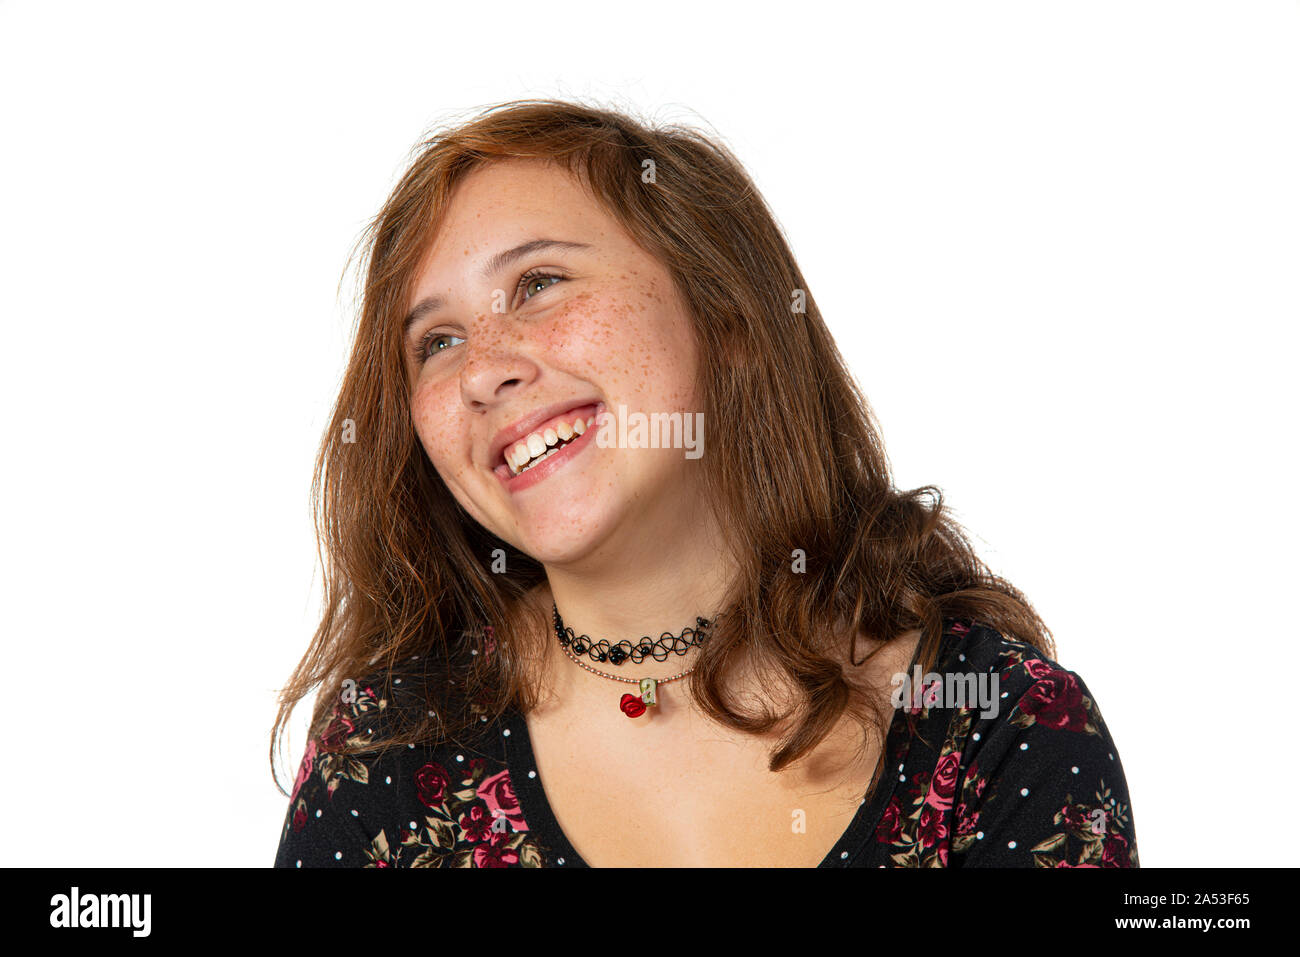 Horizontal studio shot of a laughing pre-teen girl with freckles isolated on white with copy space.  Shot from the chest up. Stock Photo